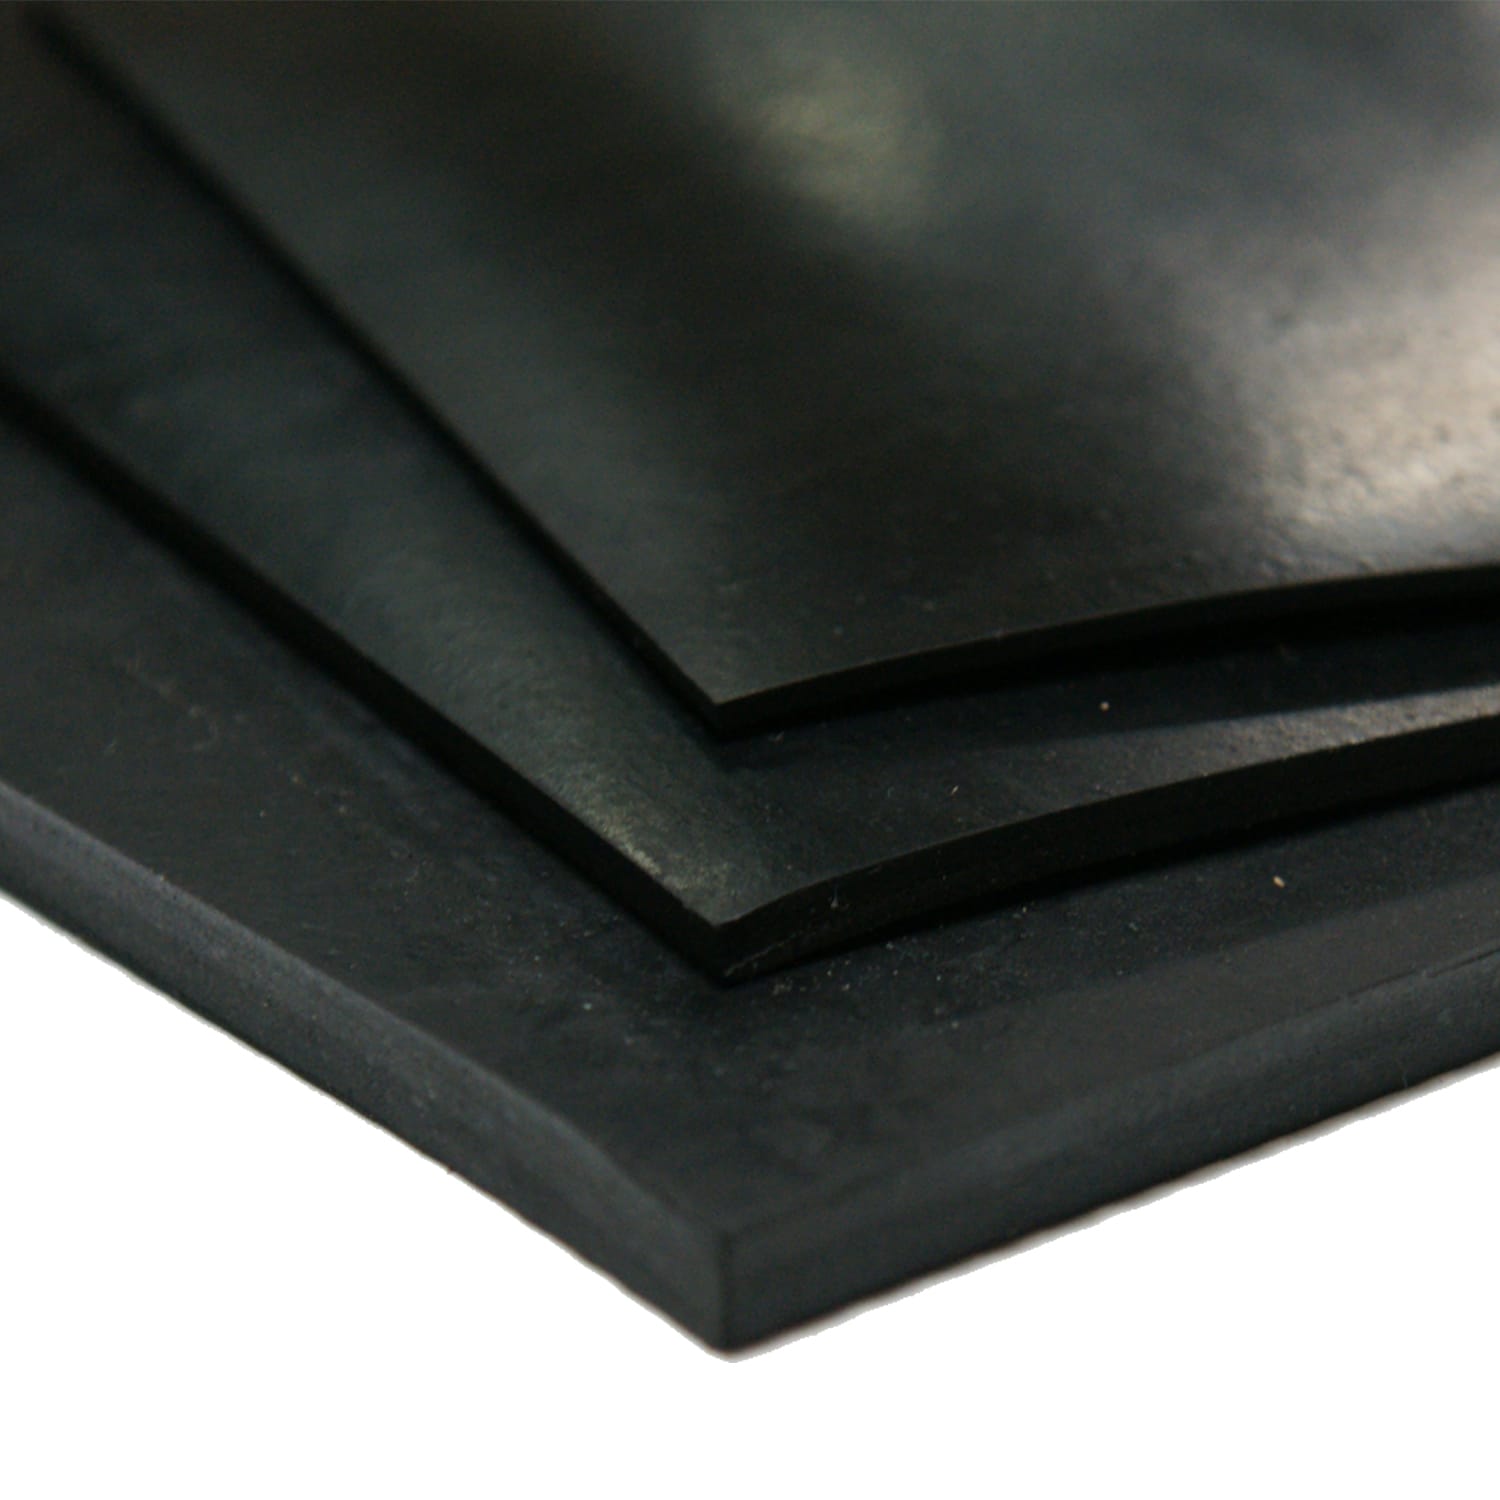 Rubber Cal Neoprene Sheet- 70A Durometer- Smooth Finish- Adhesive Backing- 0.25-in Thick x 12-in Width x 24-in Length- Black